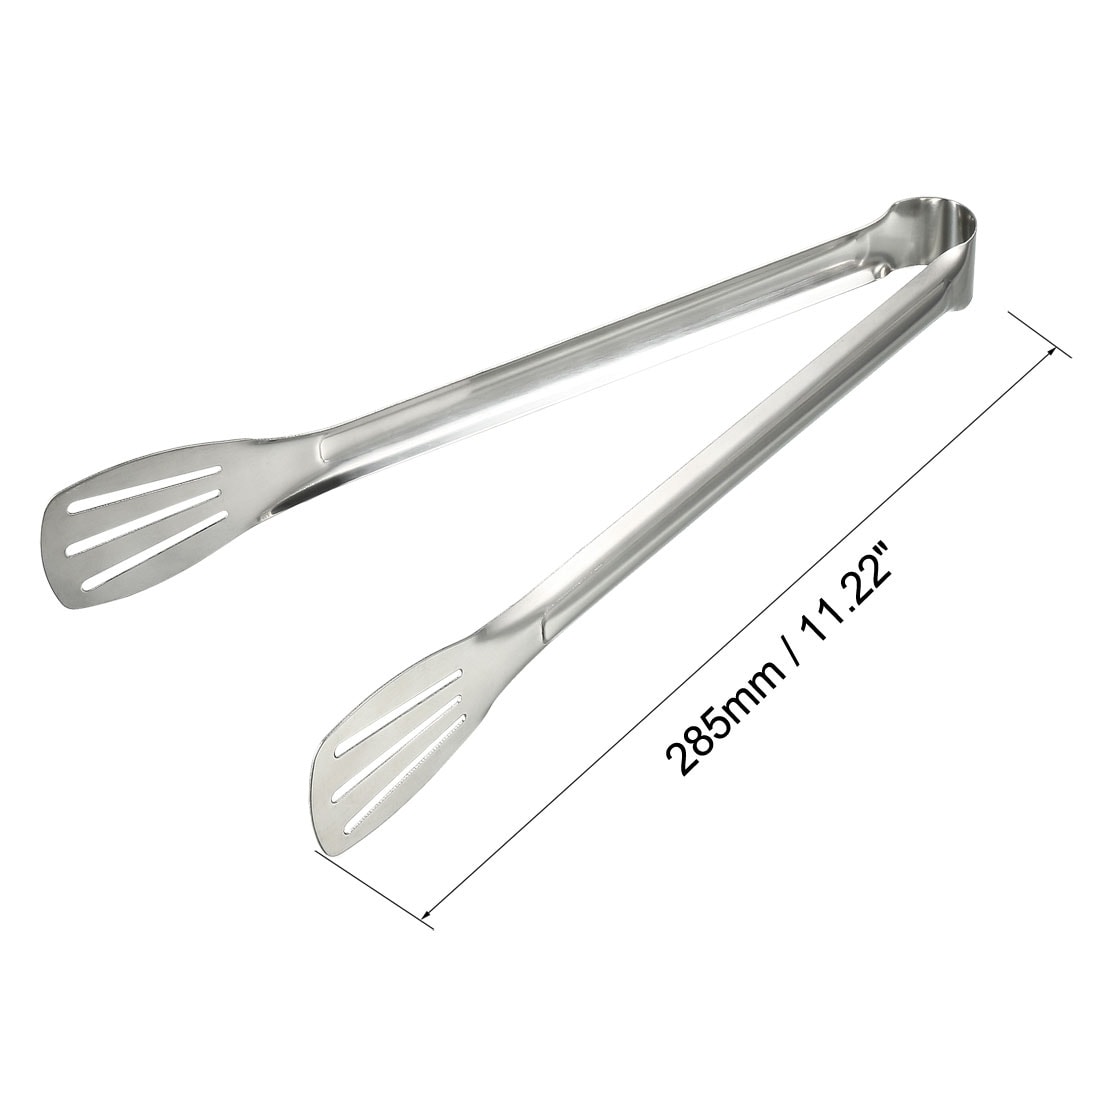 https://ak1.ostkcdn.com/images/products/is/images/direct/97802945092570efd55b77a088dac974ddbab121/11.22%22-Stainless-Steel-Barbecue-Tongs%2C-Metal-Food-Tongs-BBQ-Grilling-Accessories.jpg